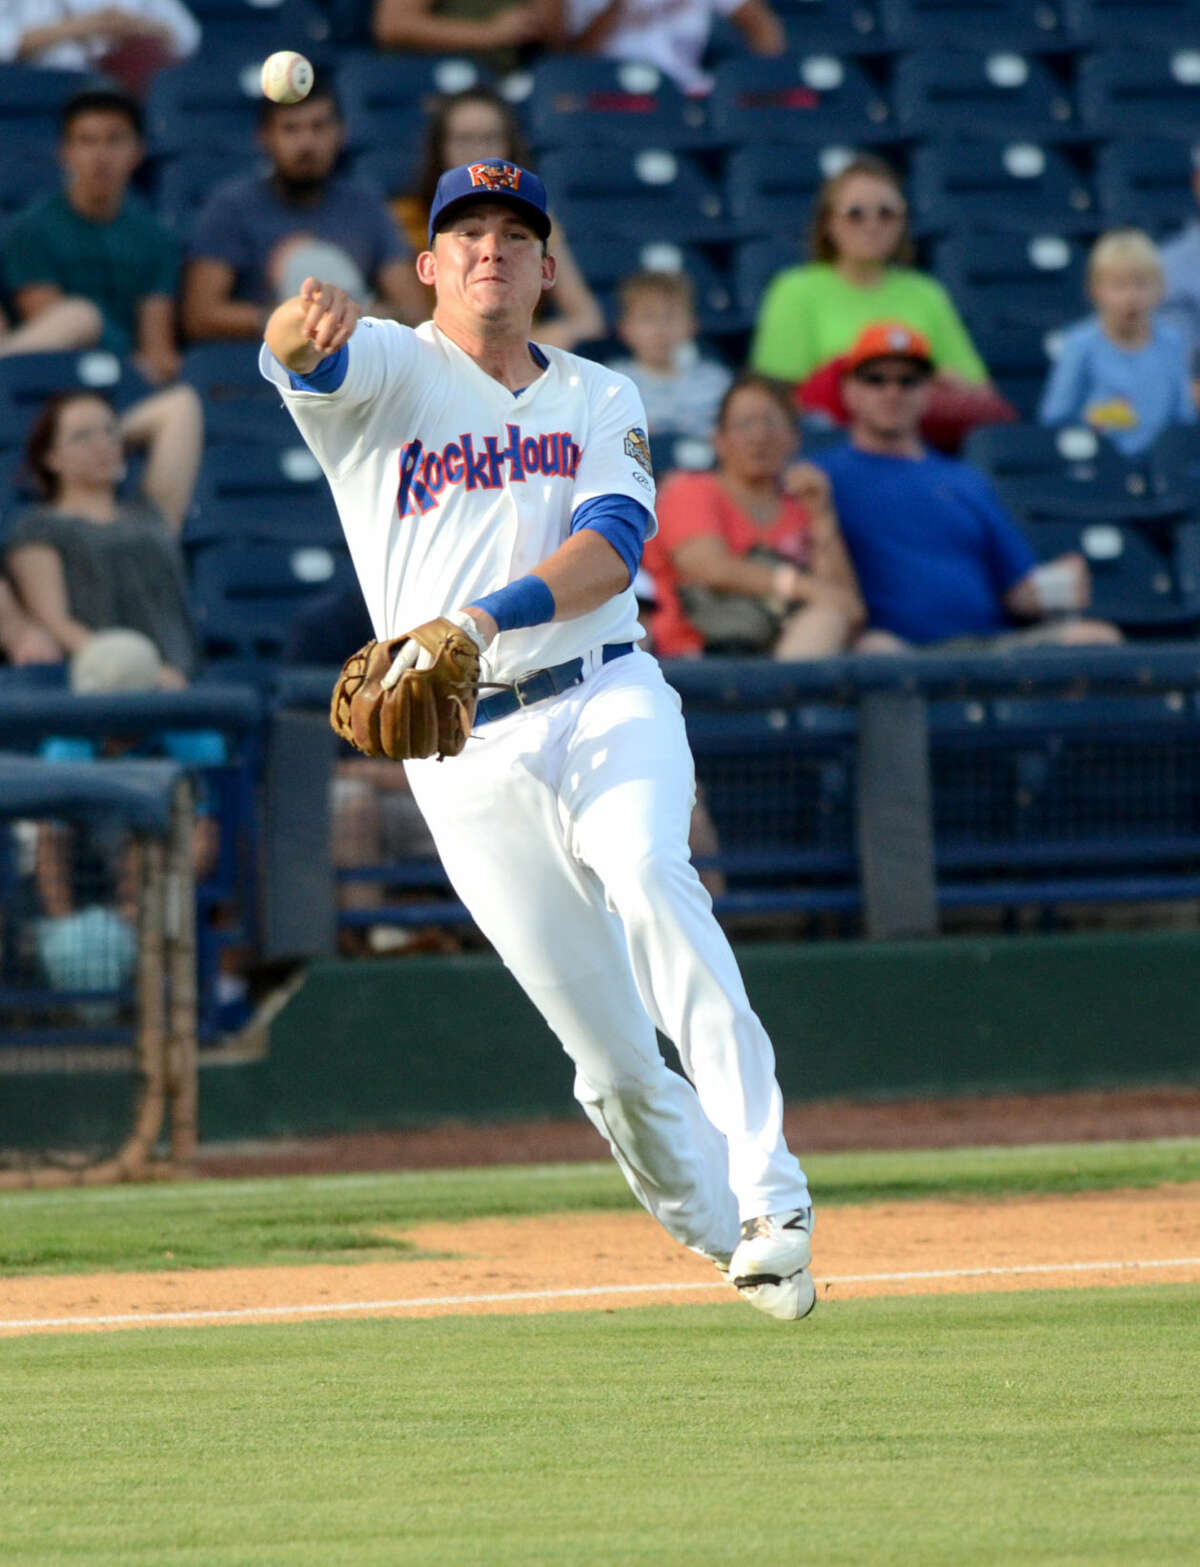 Rockhounds third baseman Ryon Healy fields the ball to first base for an out against Corpus Christi on Tuesday, June 9, 2015, at Security Bank Ballpark. James Durbin/Reporter-Telegram